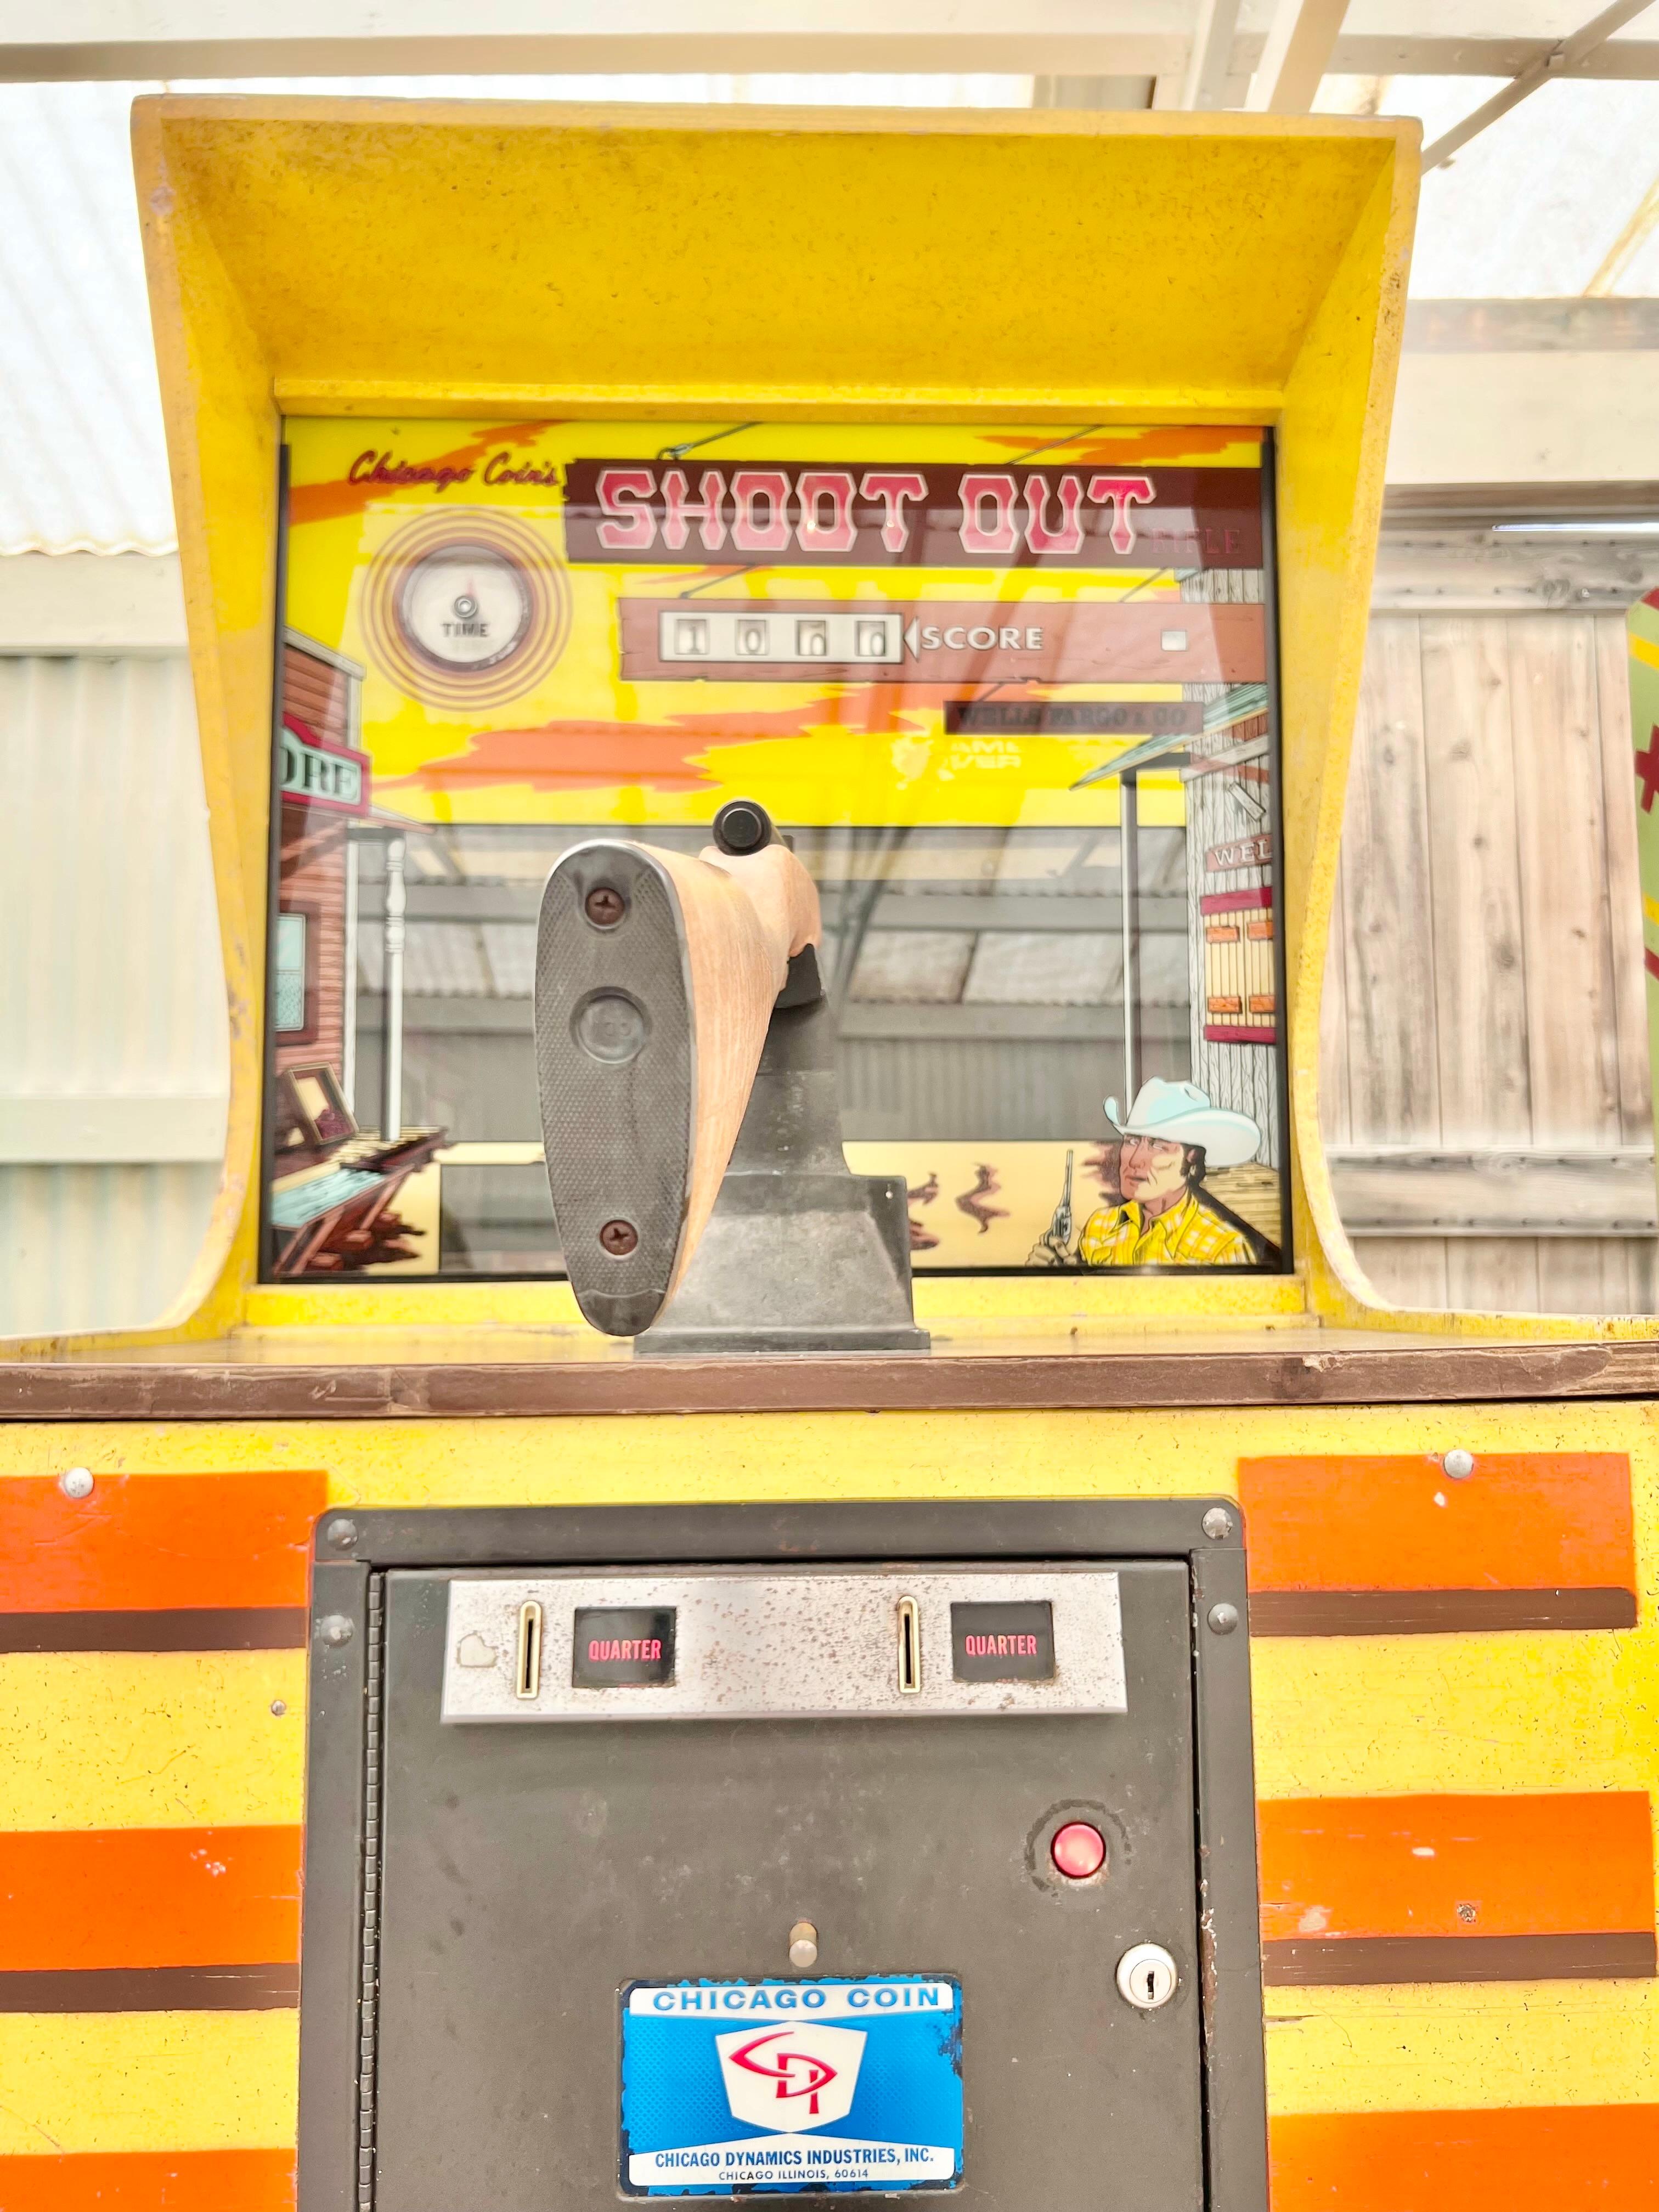 Chicago Coin ‘Shoot Out’ Arcade Game, 1976 USA For Sale 3